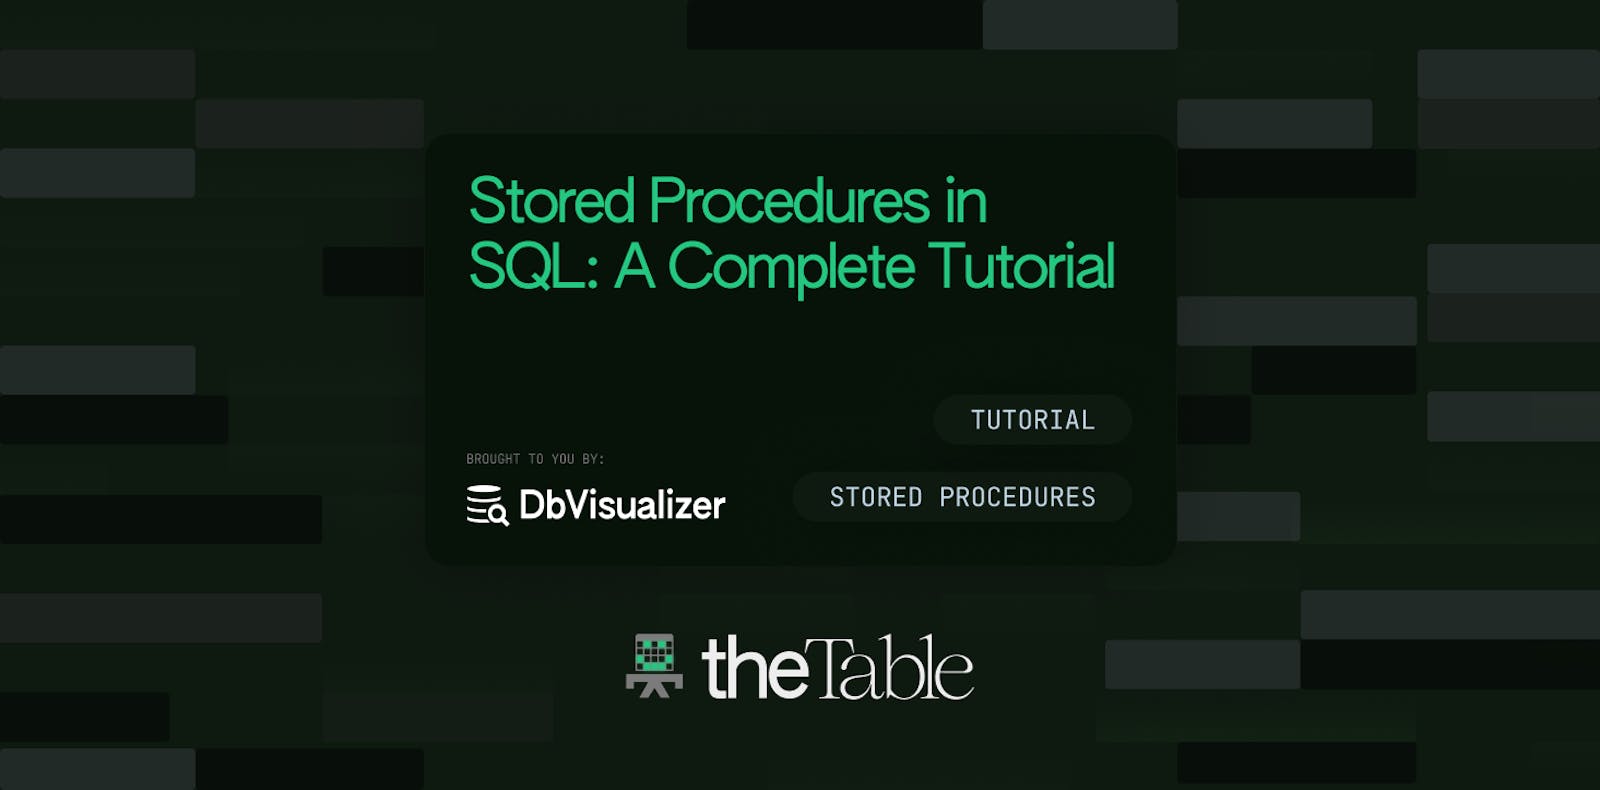 Stored Procedures in SQL: A Complete Tutorial